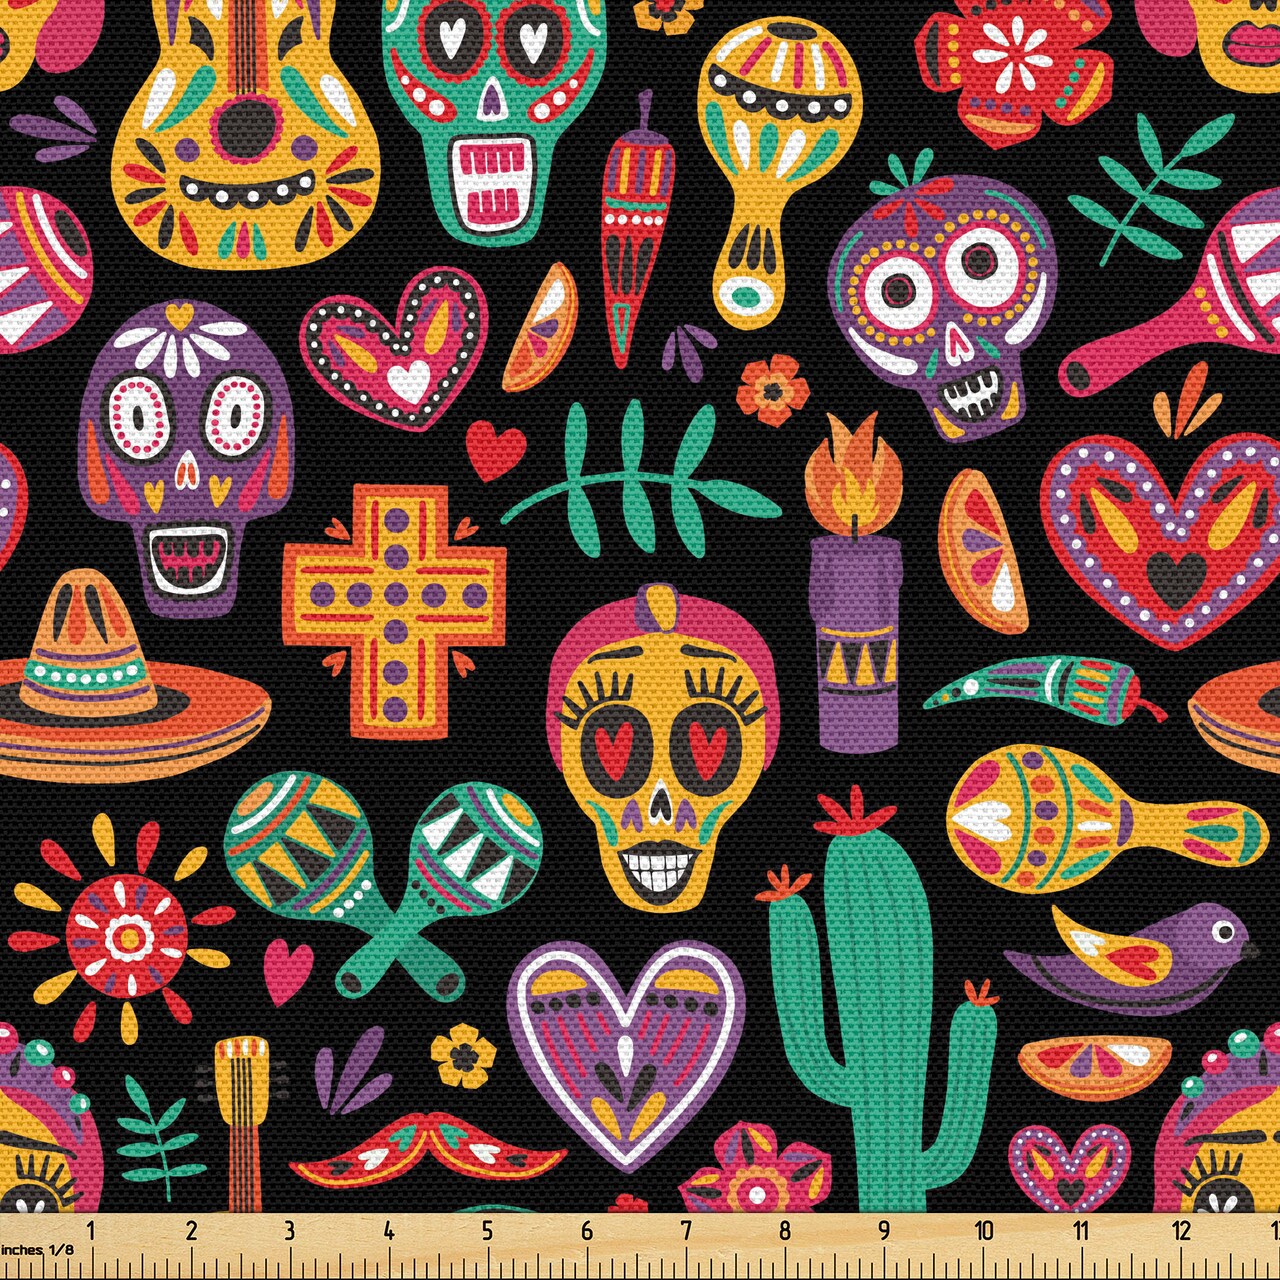 Ambesonne Day of the Dead Fabric by the Yard, Continuous Sugar Skull Flowers Pepper and Maracas Pattern, Decorative Fabric for Upholstery and Home Accents, 2 Yards, Charcoal Grey Multicolor